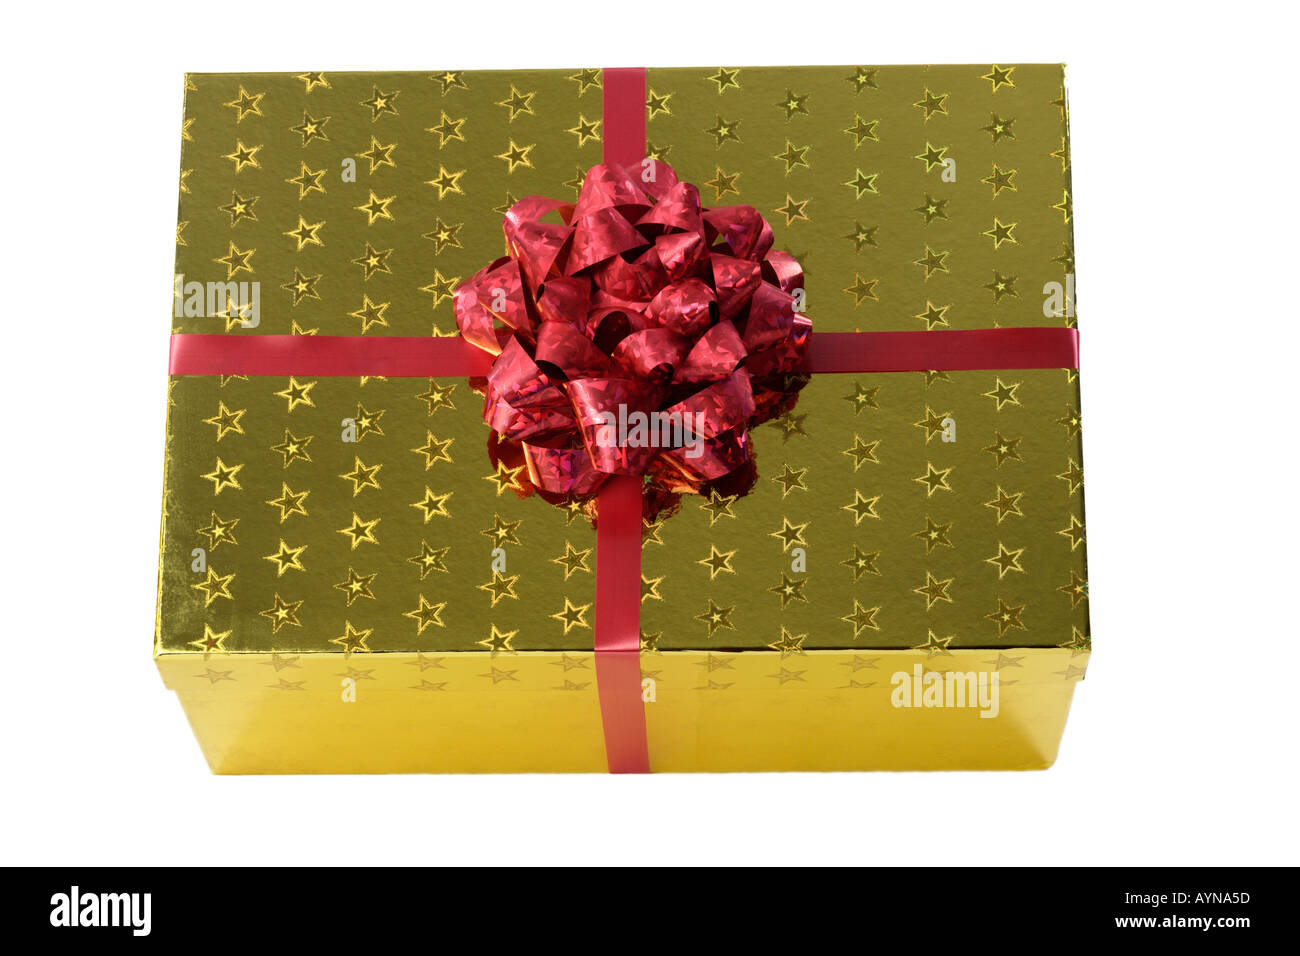 Still life of a shiny gold gift wrapped present with an ornate red bow isolated on a white background Stock Photo